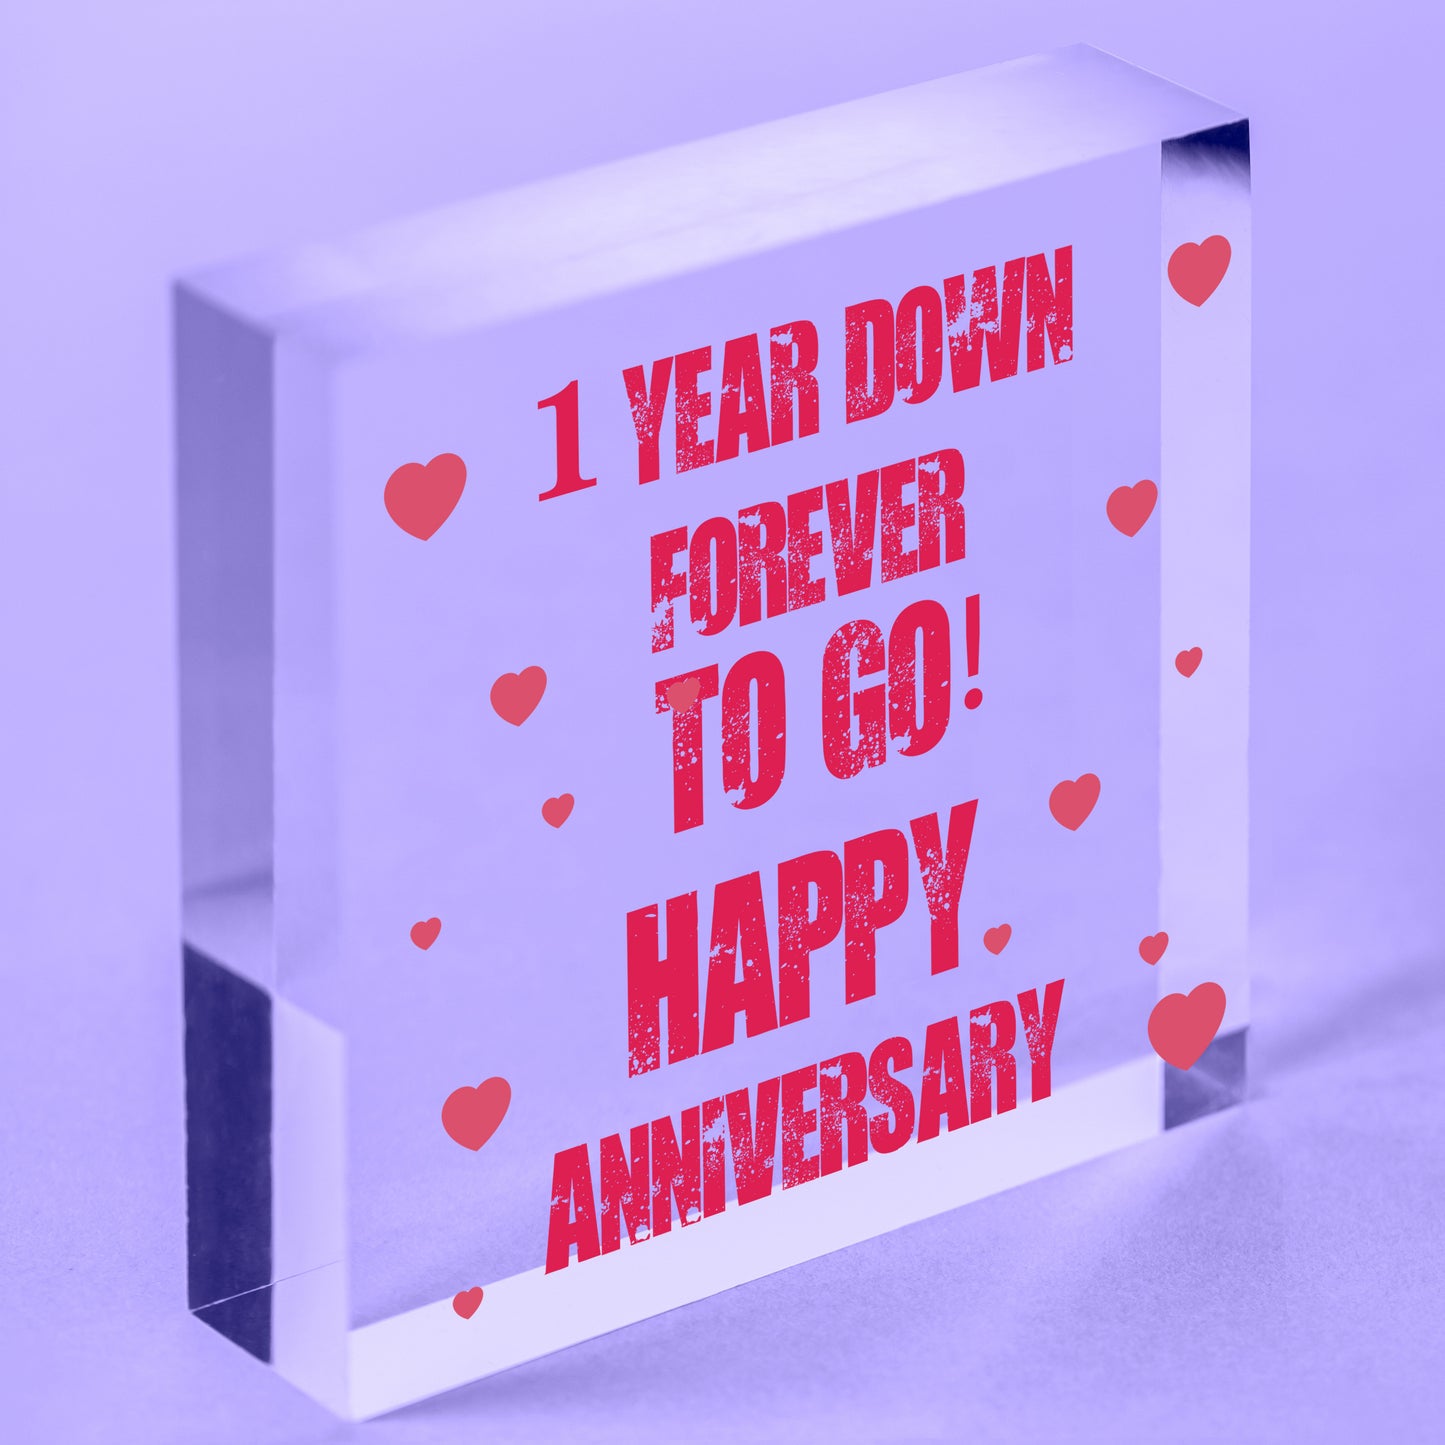 1 Year Down Forever To Go Funny 1st Anniversary Gift For Boyfriend or Girlfriend Free-Standing Block